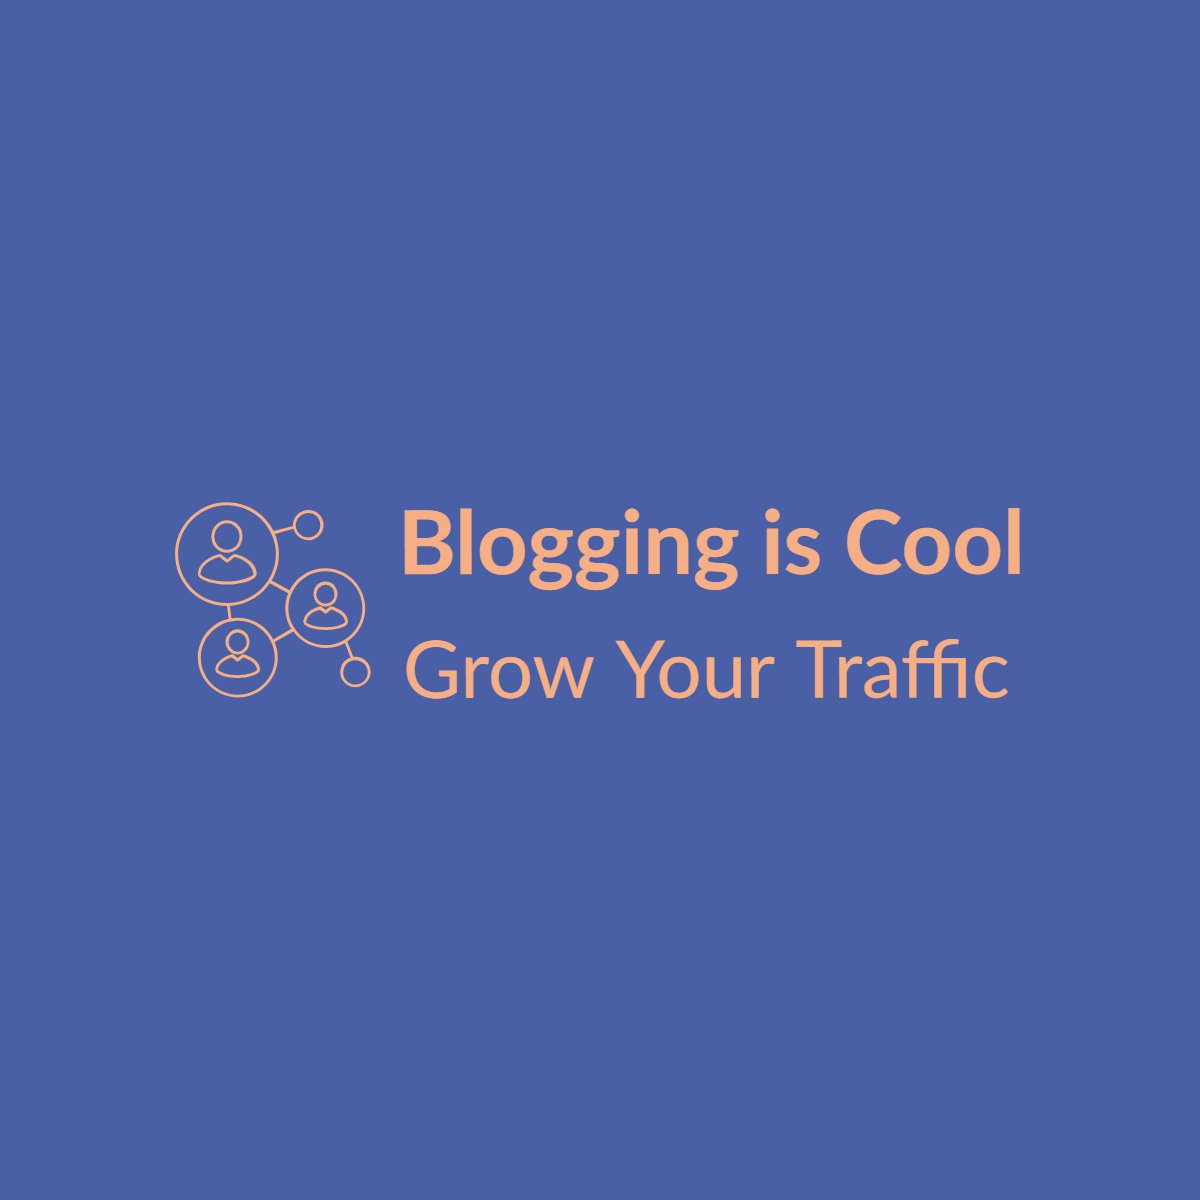 Bloggingiscool.com How to disclose that you are making money from your blog posts